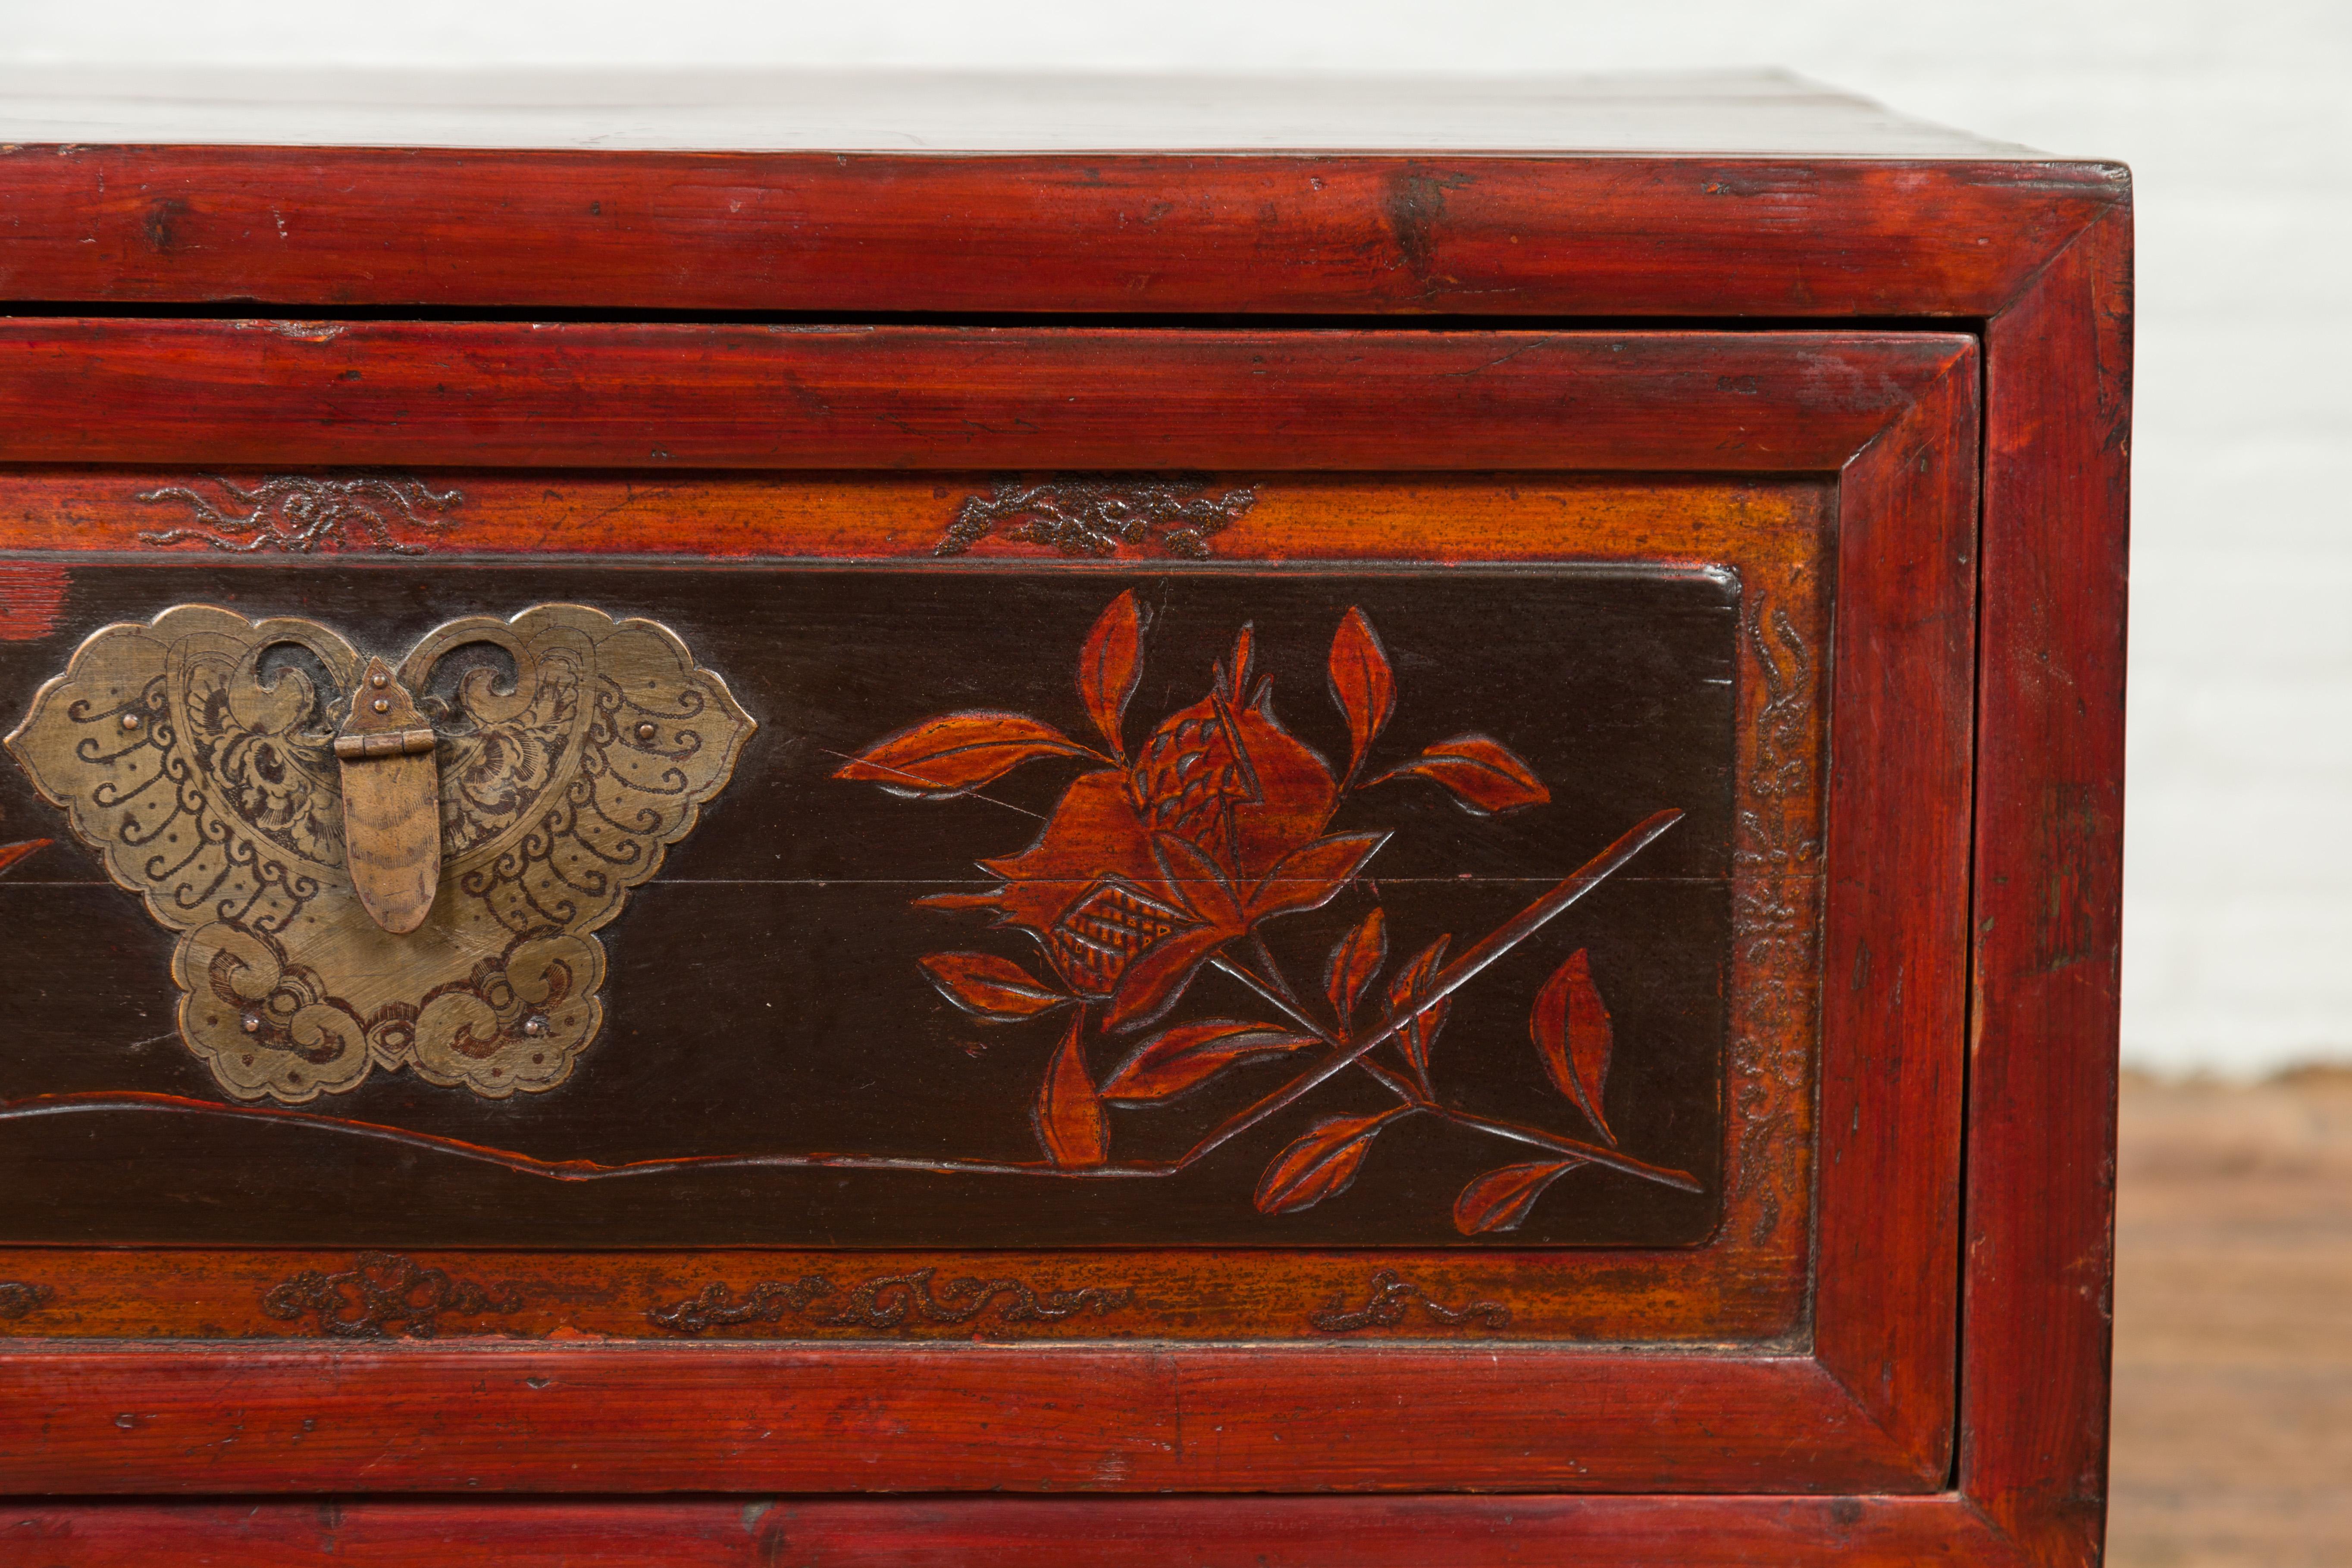 20th Century Chinese Red and Black Lacquered Two-Part Storage Cabinet with Bronze Hardware